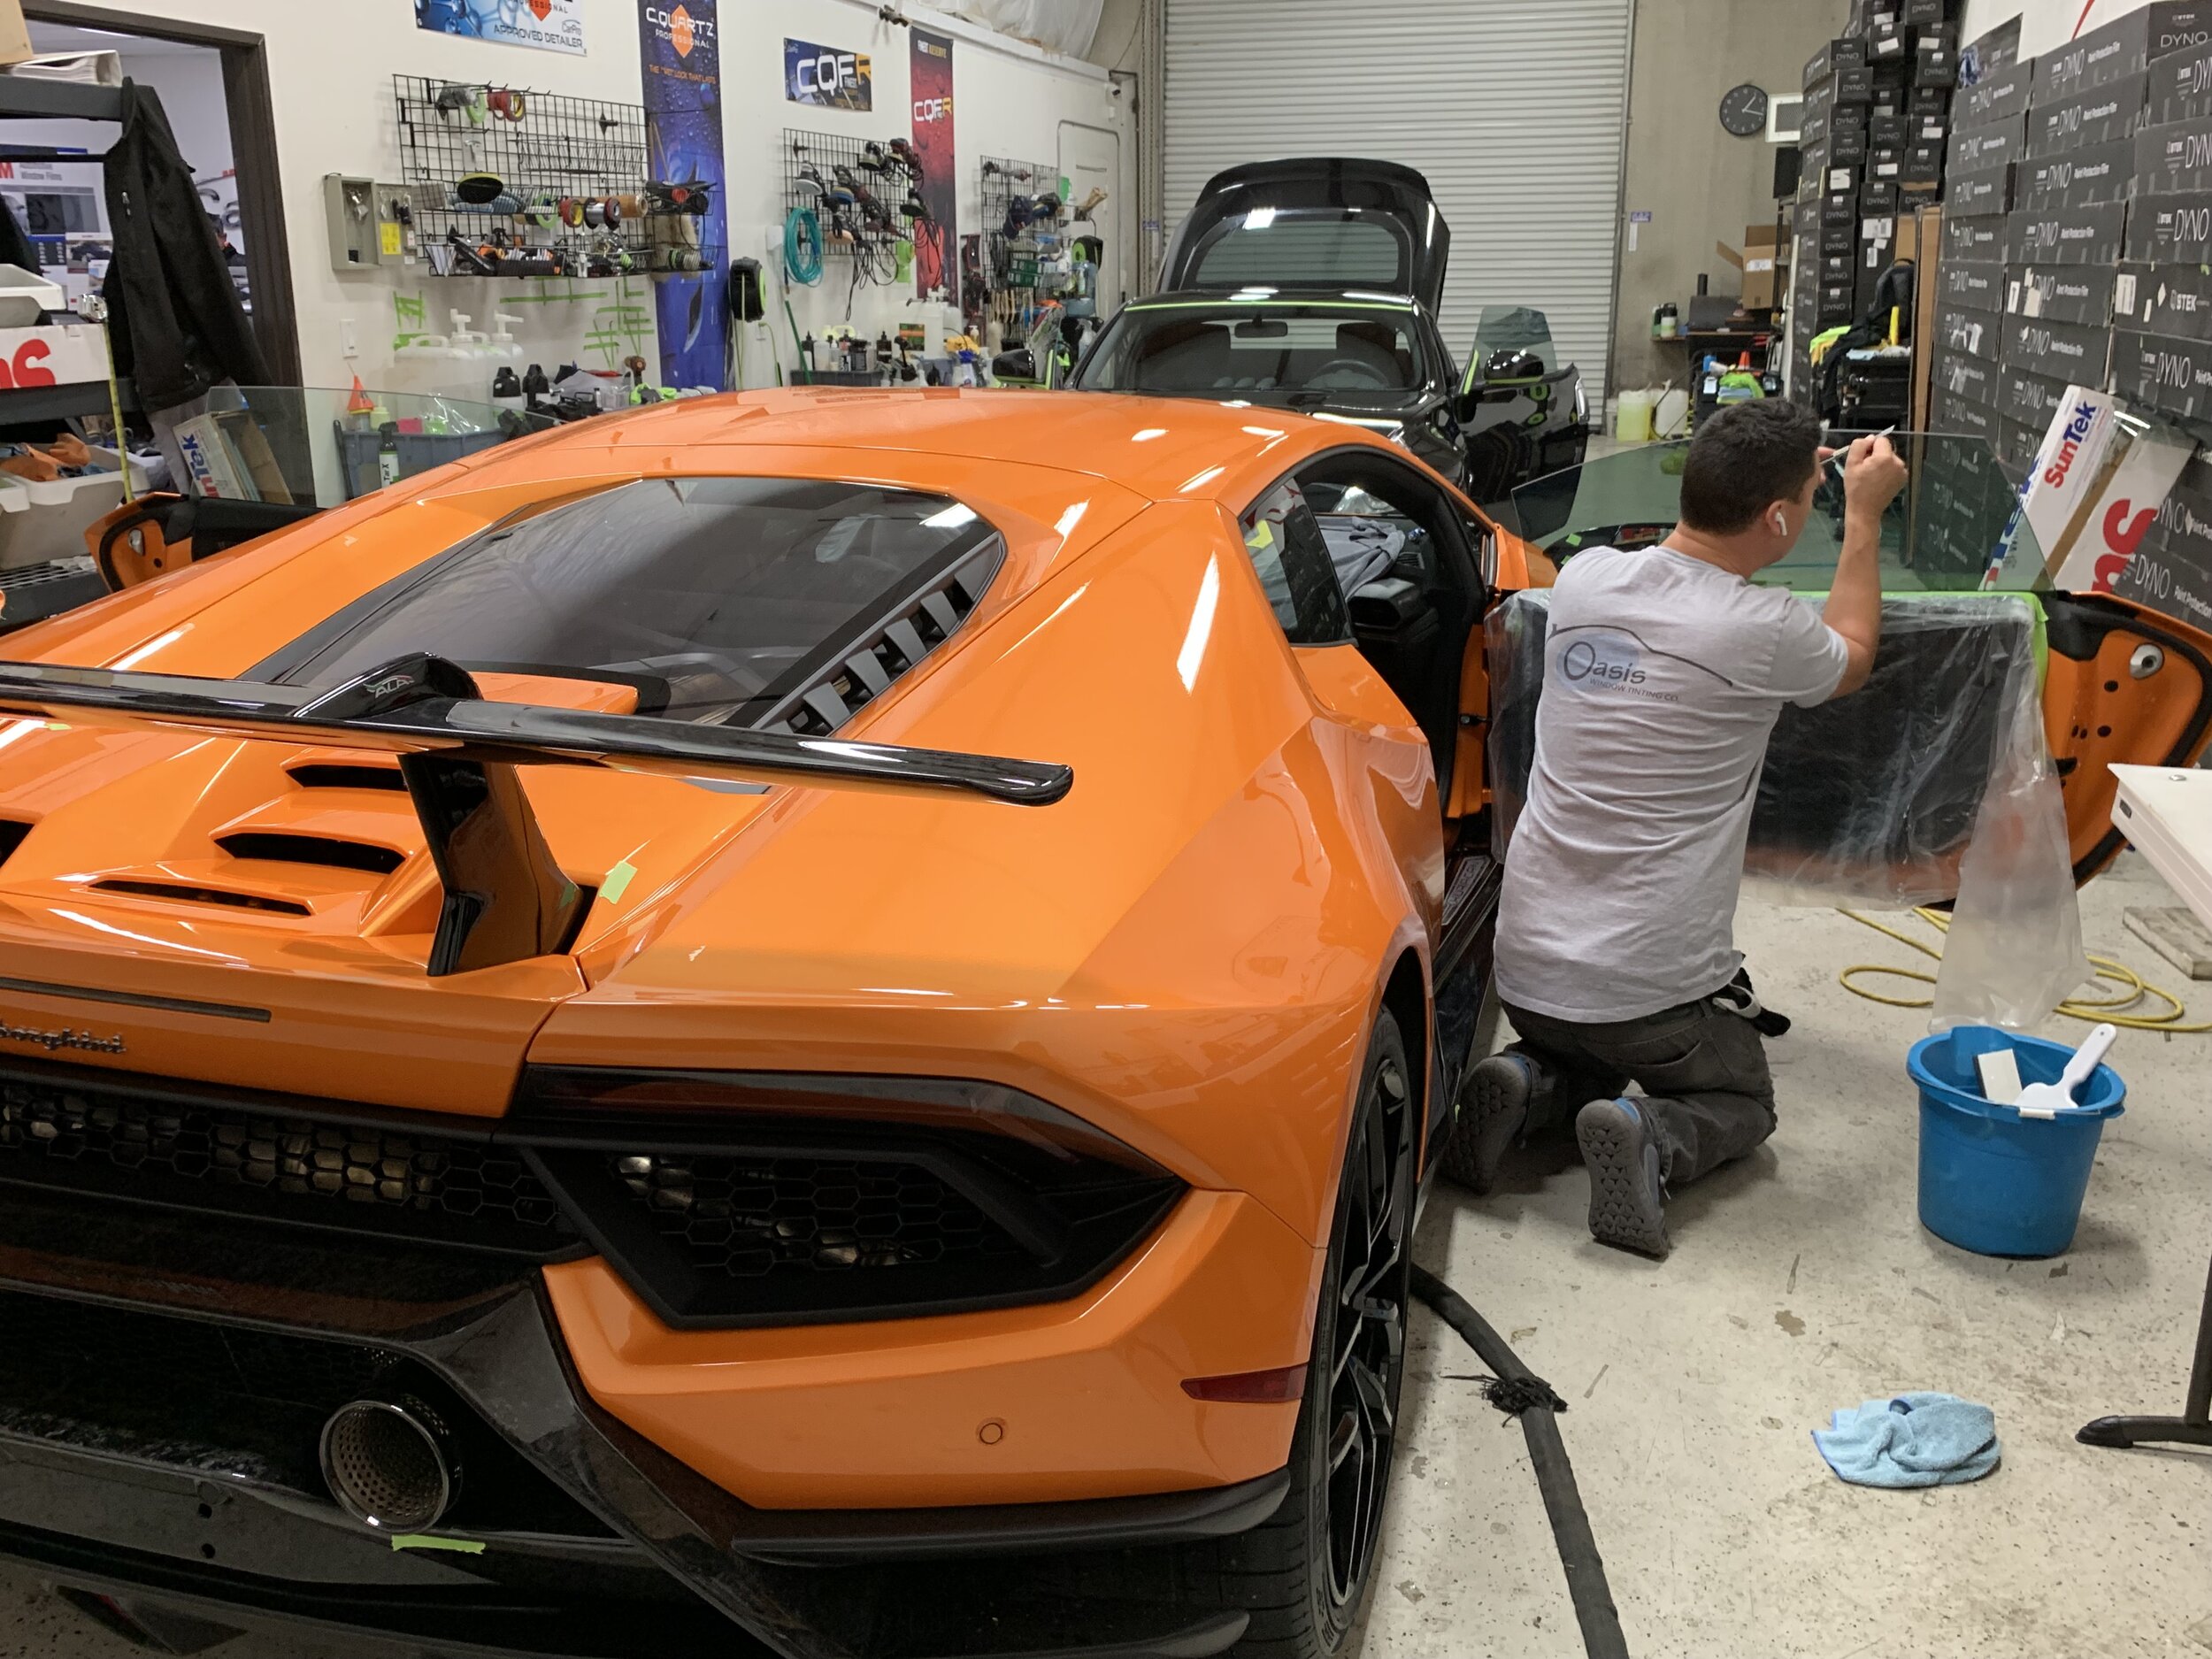 Aaron installing tint at a local detail shop